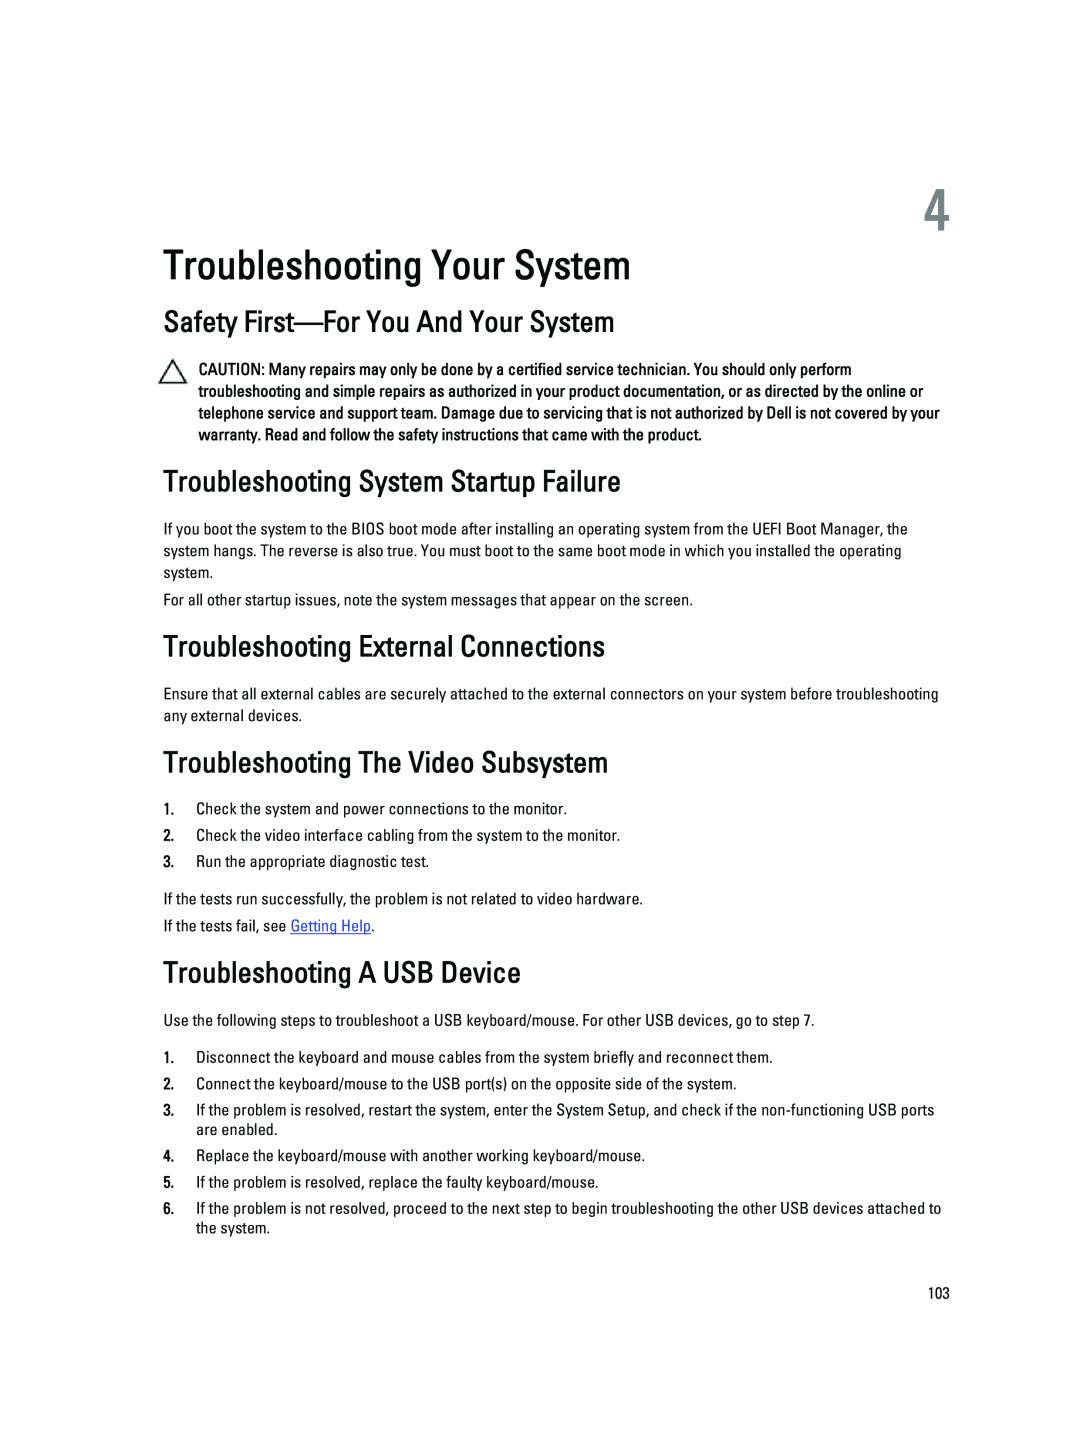 Dell R820 Troubleshooting Your System, Safety First-For You And Your System, Troubleshooting System Startup Failure 